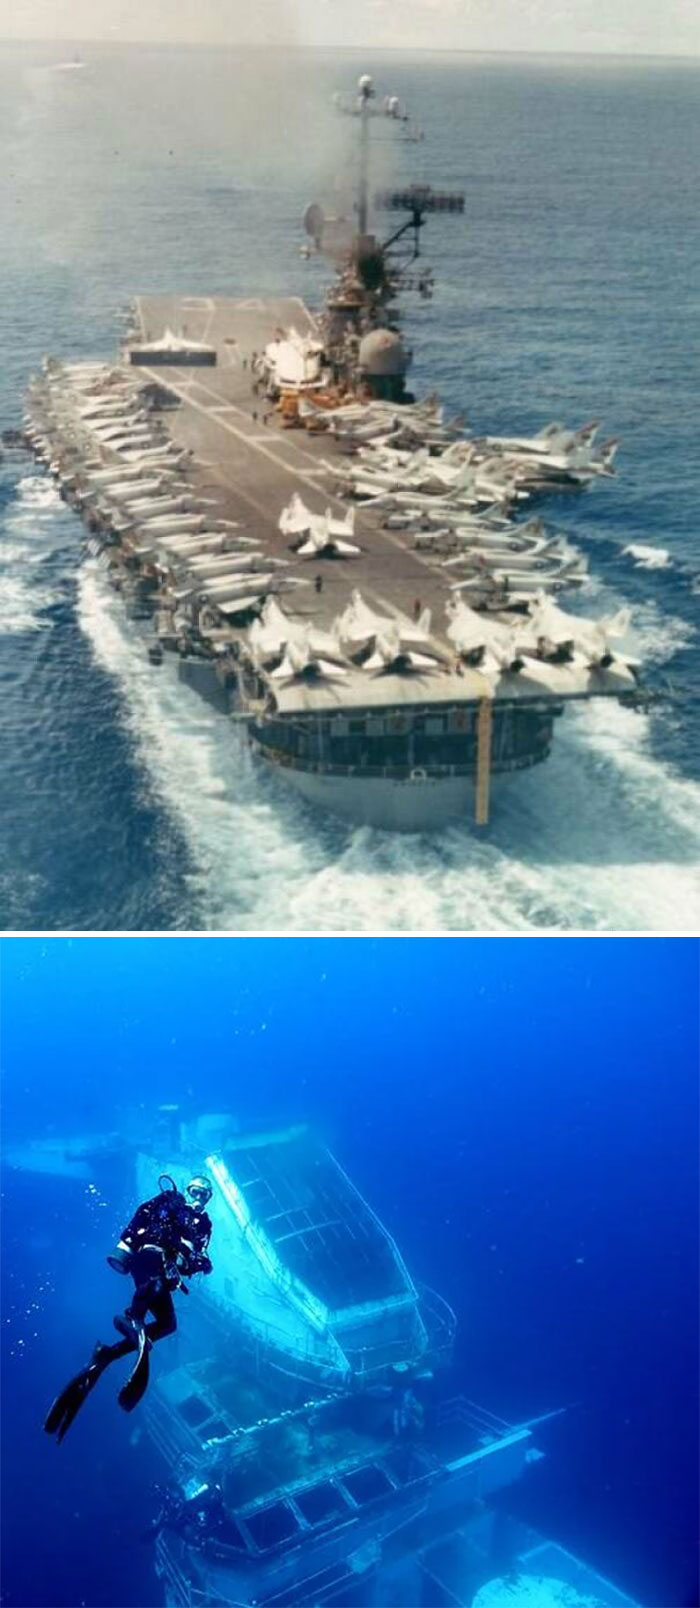 Today At Work I Learned About An Aircraft Carrier Which The Us Intentionally Sank Off The Florida Coast In 2006, To Create An Artificial Reef. The Reef Project Was Quite Successful! But God, The Photos Make Me Quiver